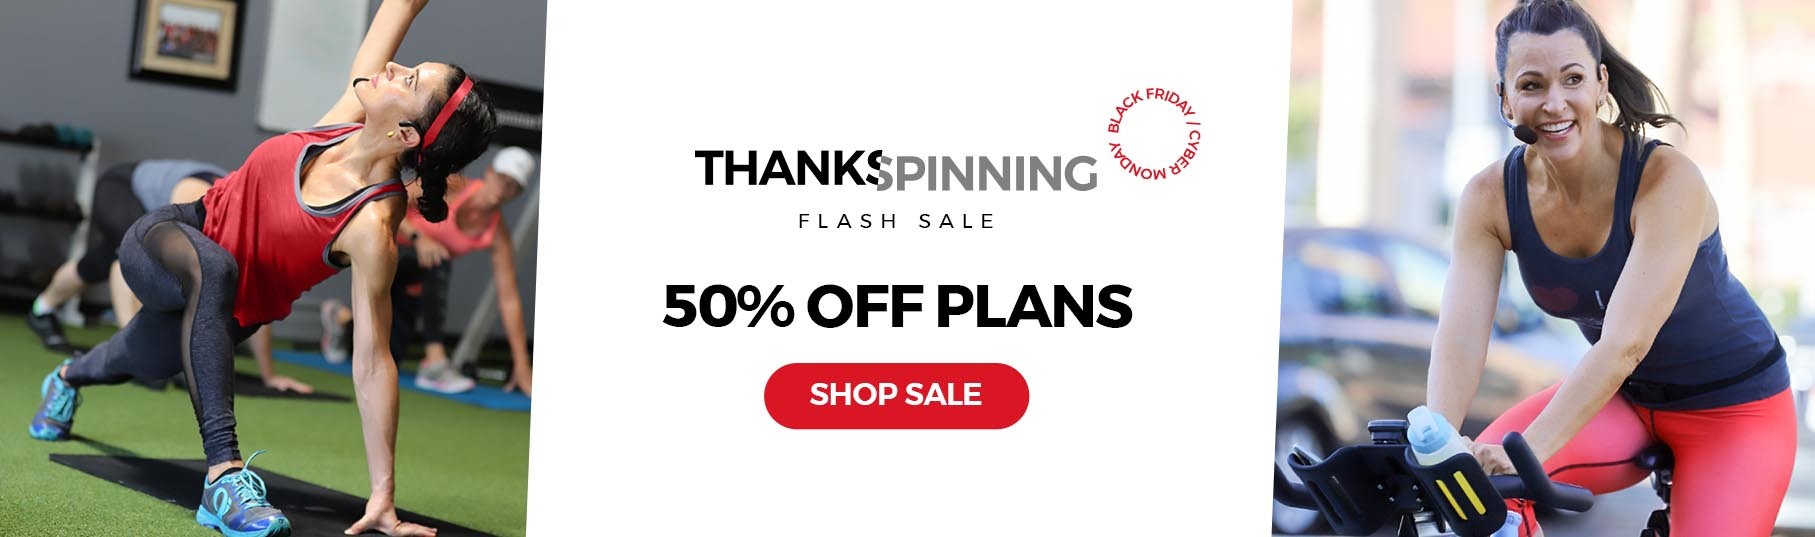 Shop Our THANKSSPINNING SALE SUPER SALE and Get Unlimited Access to Studio SWEAT onDemand Indoor Cycling and Training workouts from home!